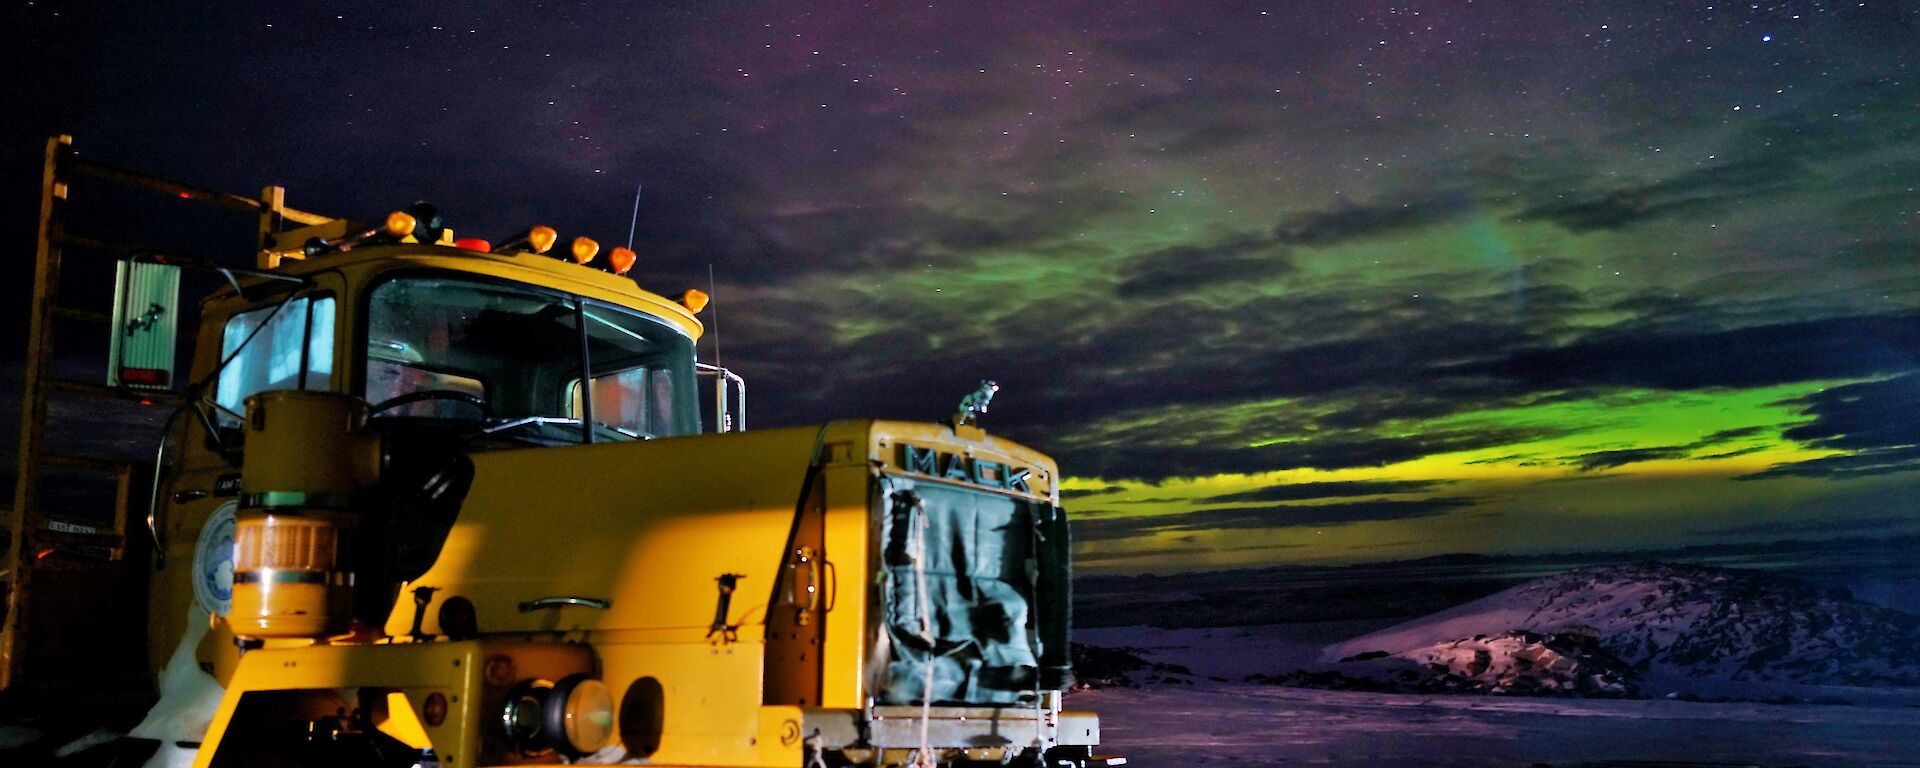 Aurora with large Mack truck in foreground